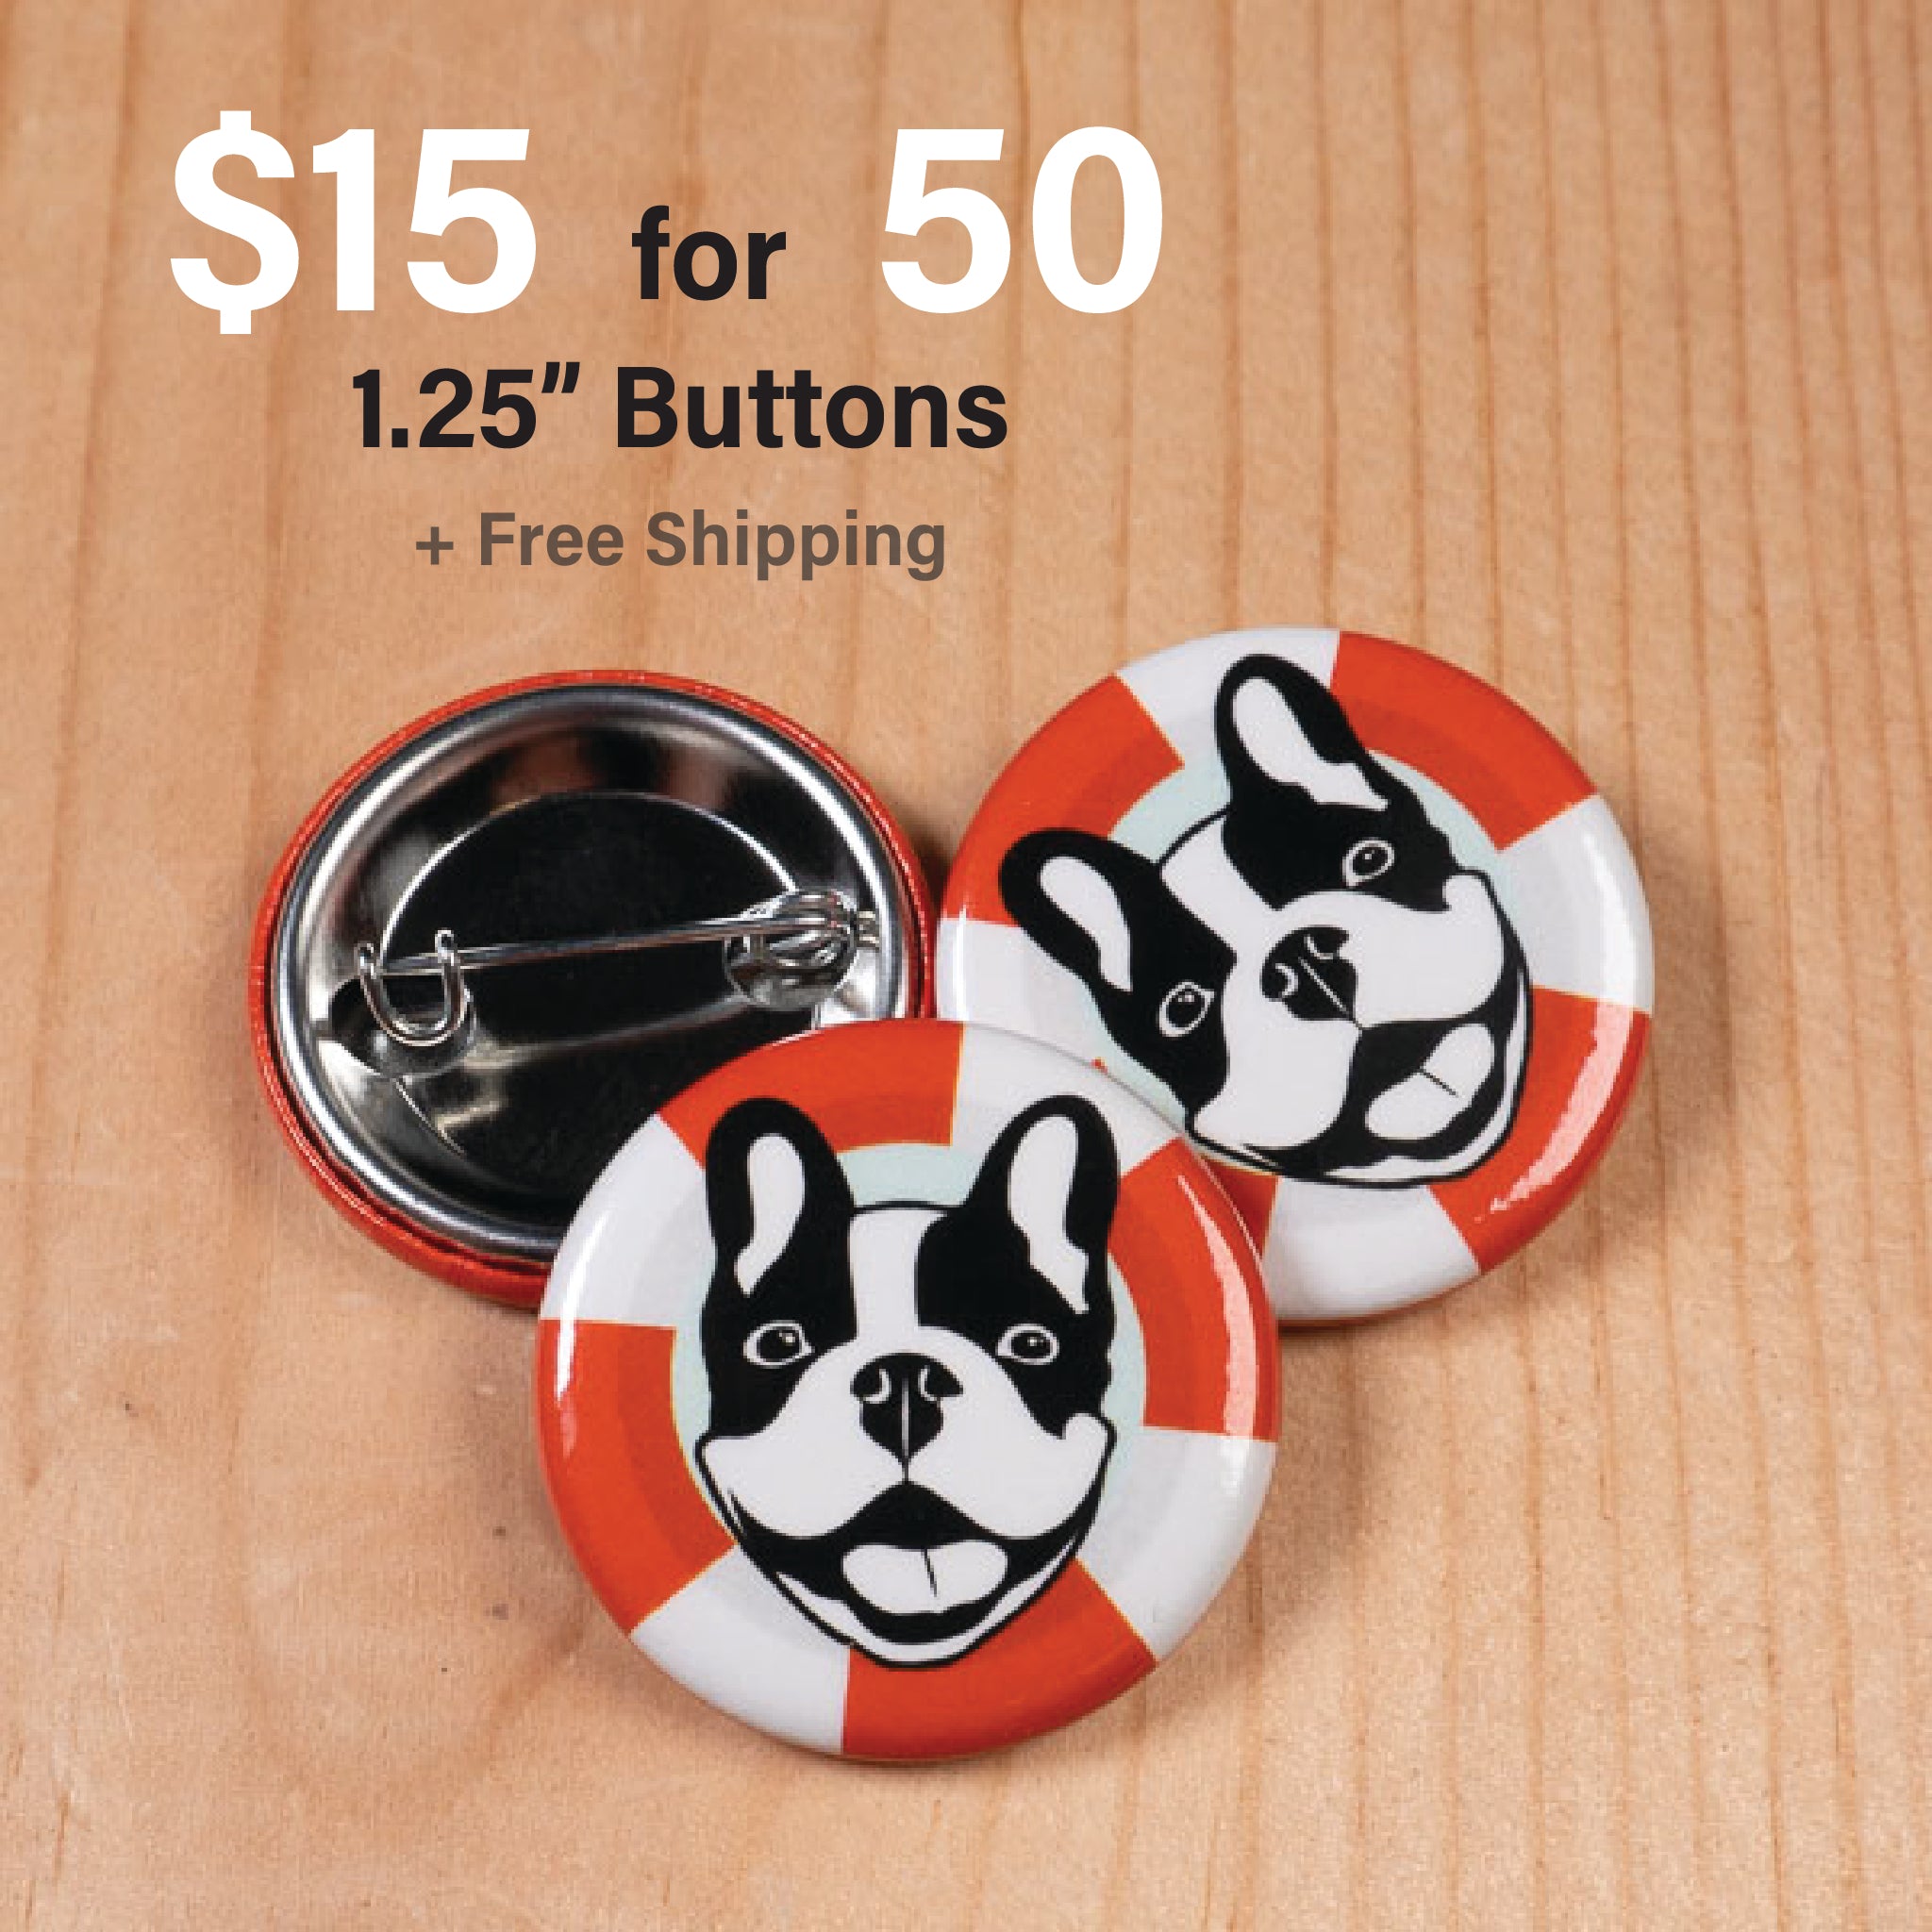 50 x 1.25" Buttons for $15